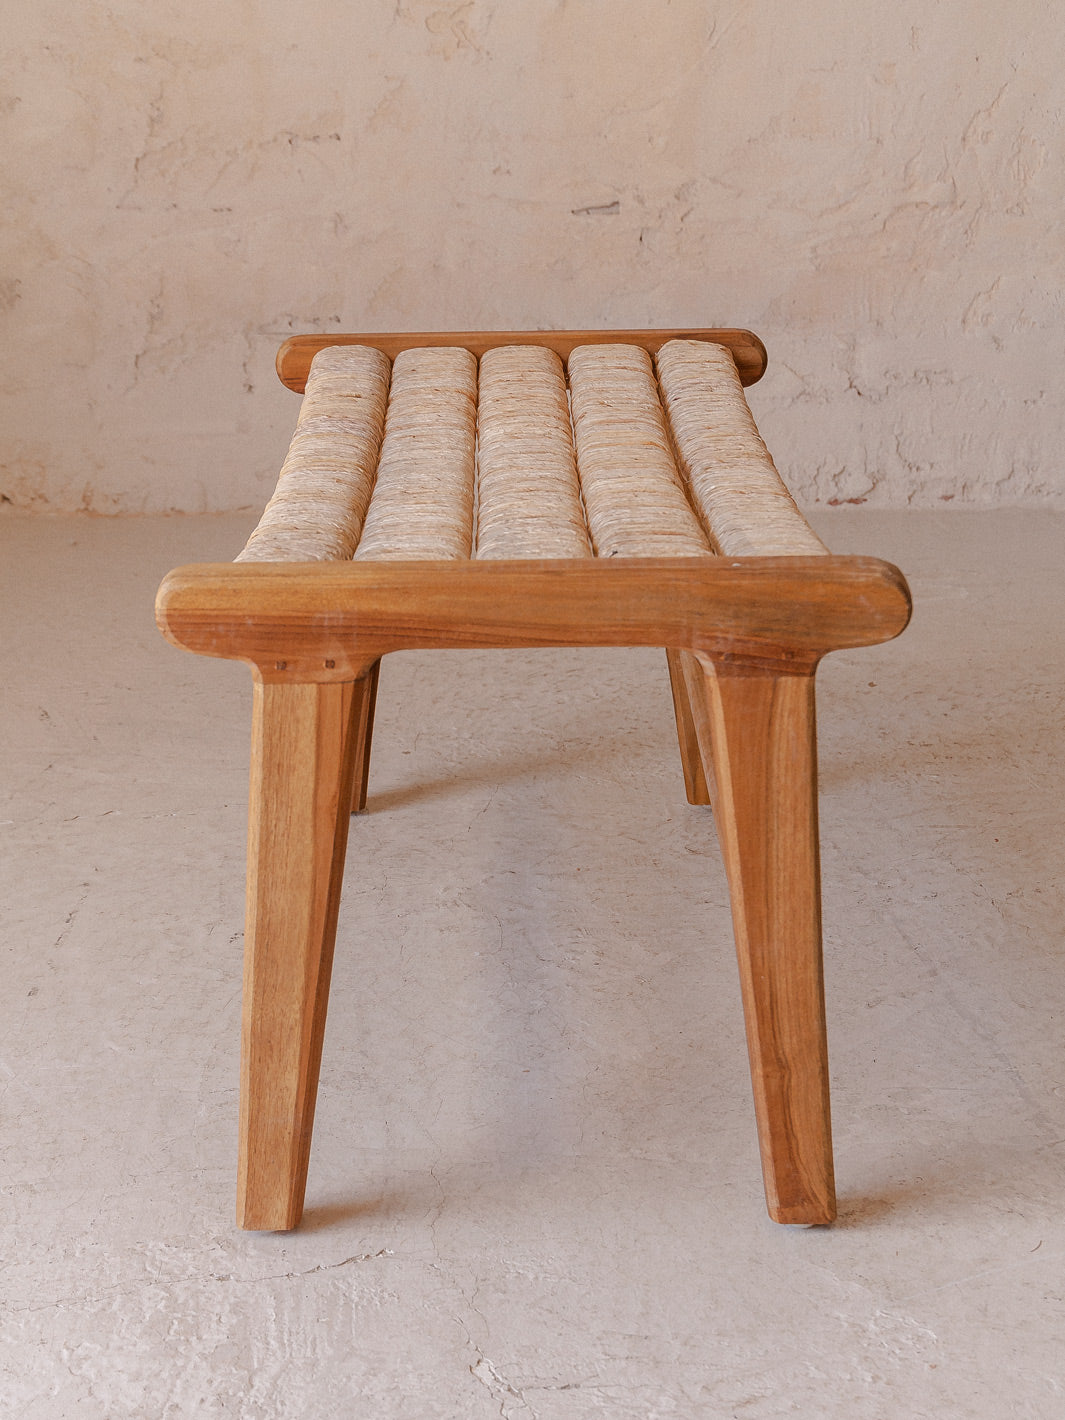 Teak and abaca bench